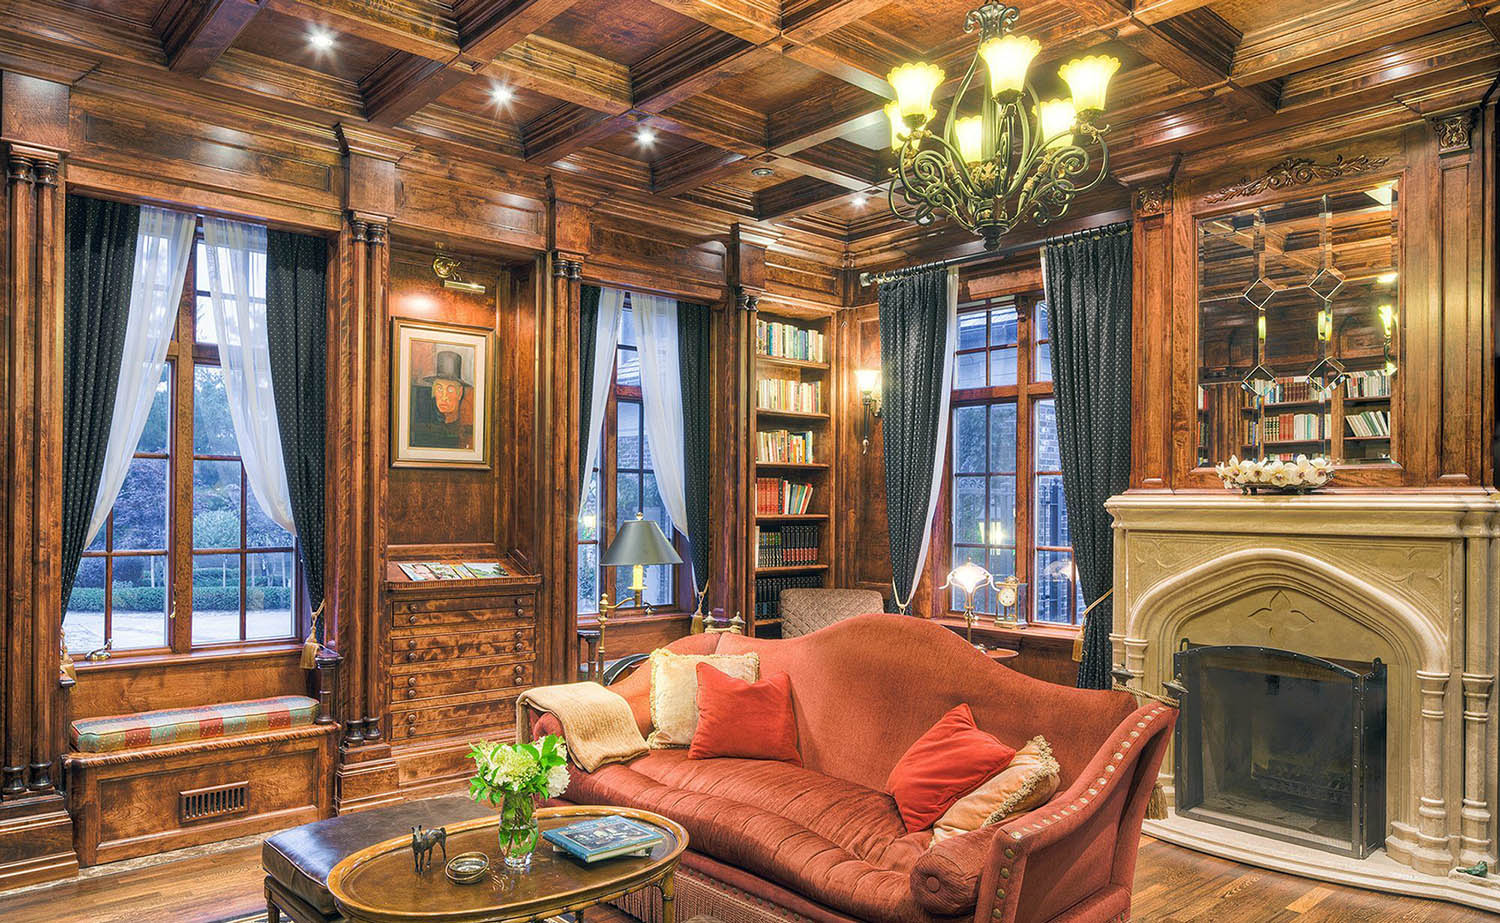 Wood wall paneling with coffered ceiling. Built in shelves and cabinets. Large fireplace surround. Hardwood floors.